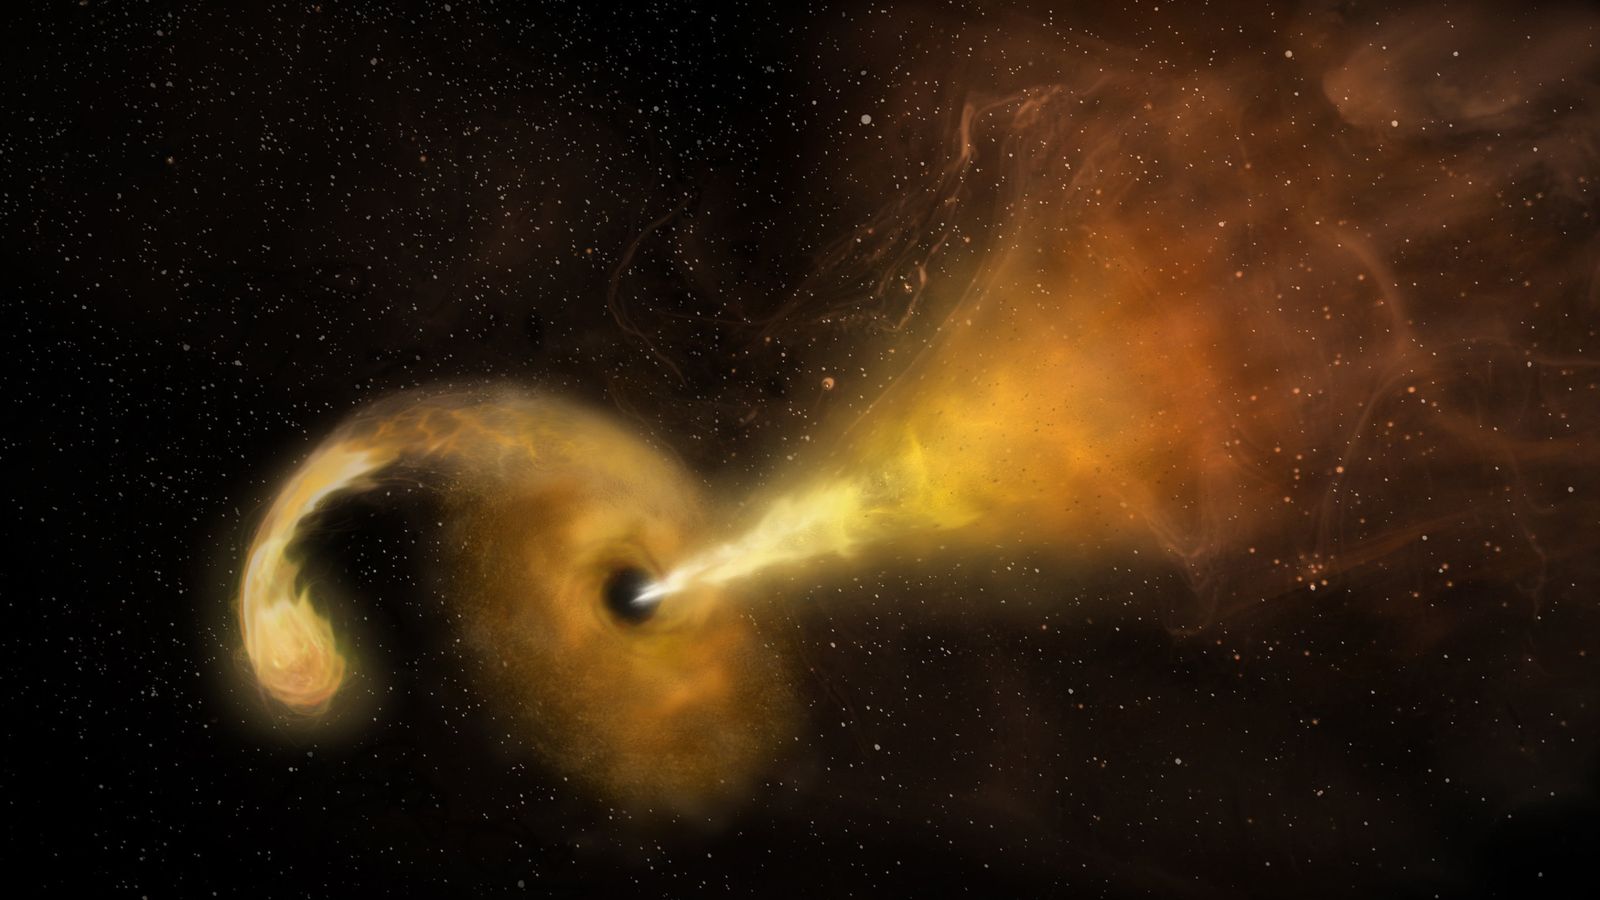 Astronomers watch a black hole eating a star | Science & Tech News | Sky News